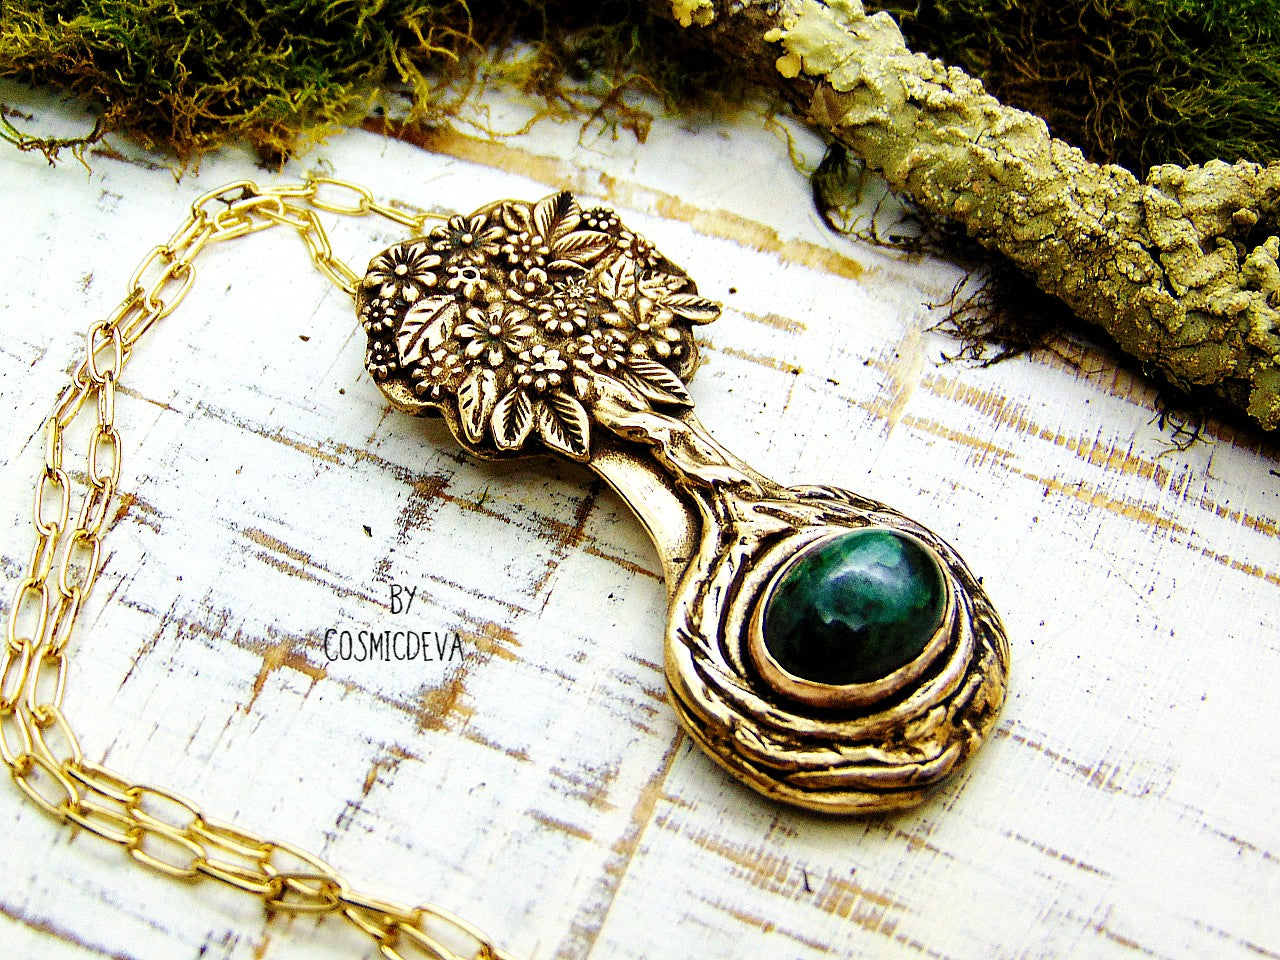 Express your love of life and nature with this intricately-crafted Tree of Life pendant necklace. Handcrafted from solid bronze with a beautiful emerald stone at its root, this unique piece of jewelry celebrates togetherness, growth, and individuality. Give yourself or a loved one the enduring gift of its timeless symbolism.